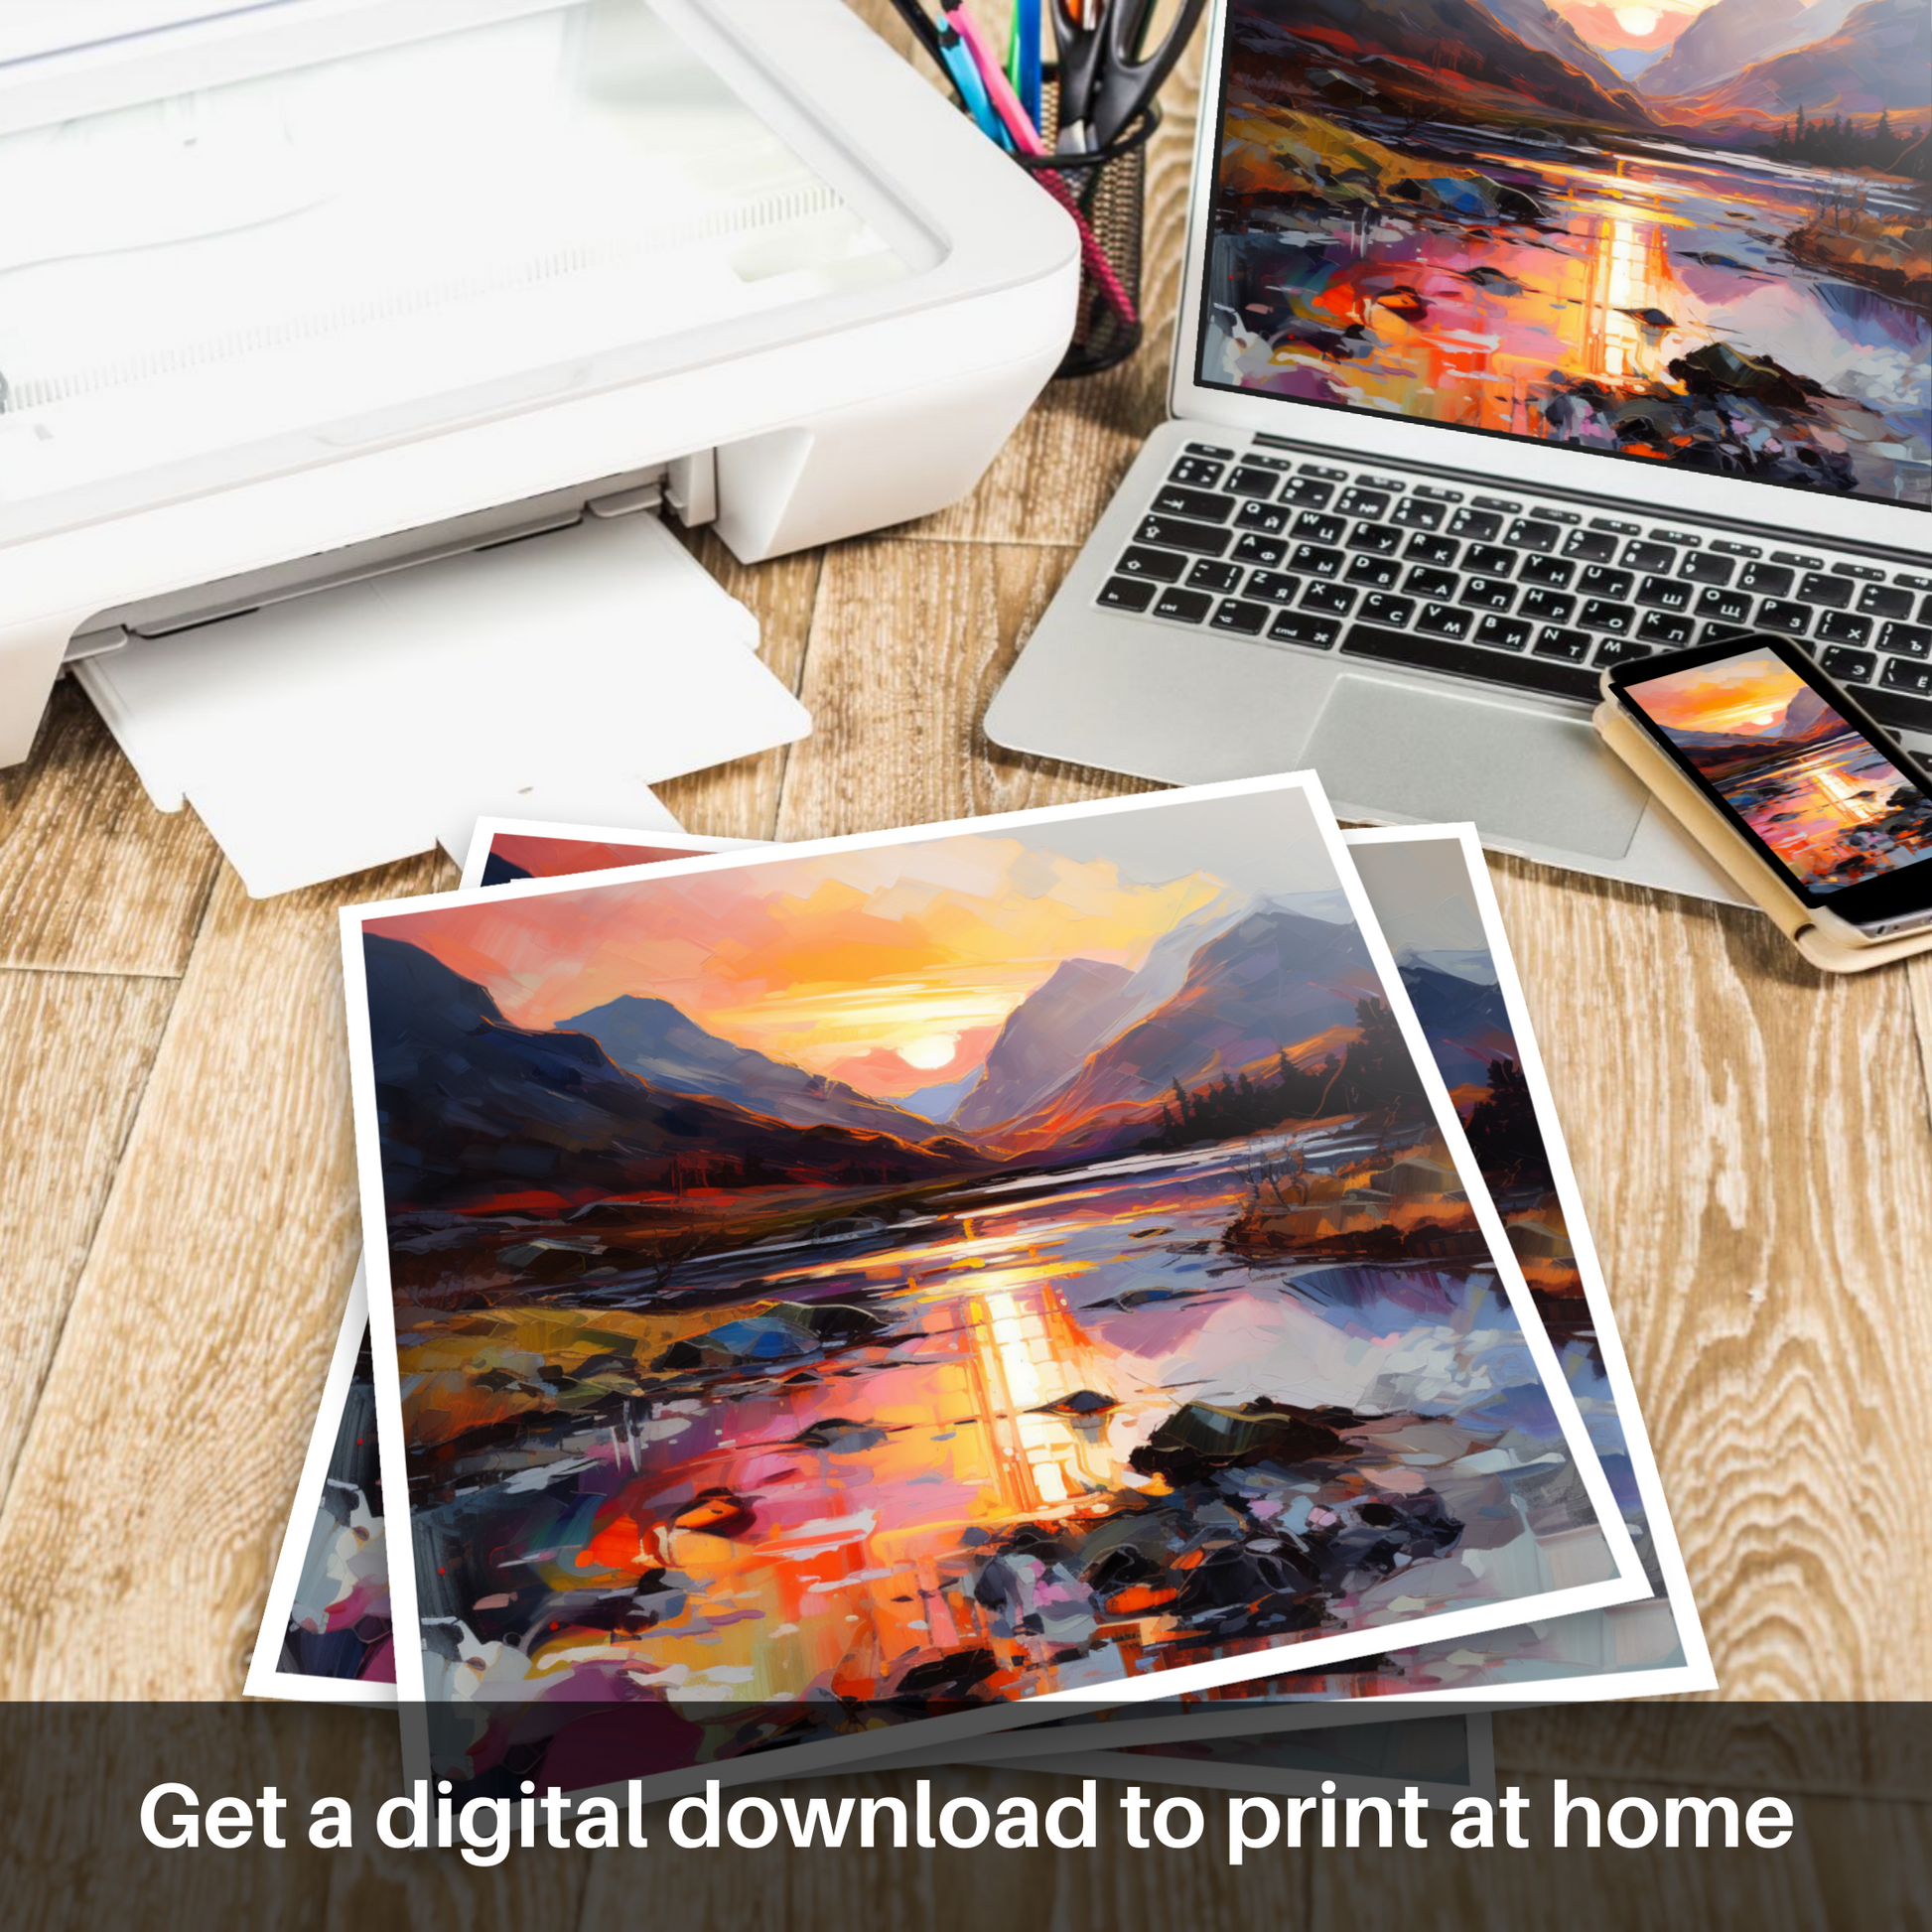 Downloadable and printable picture of Sunset glow in Glencoe